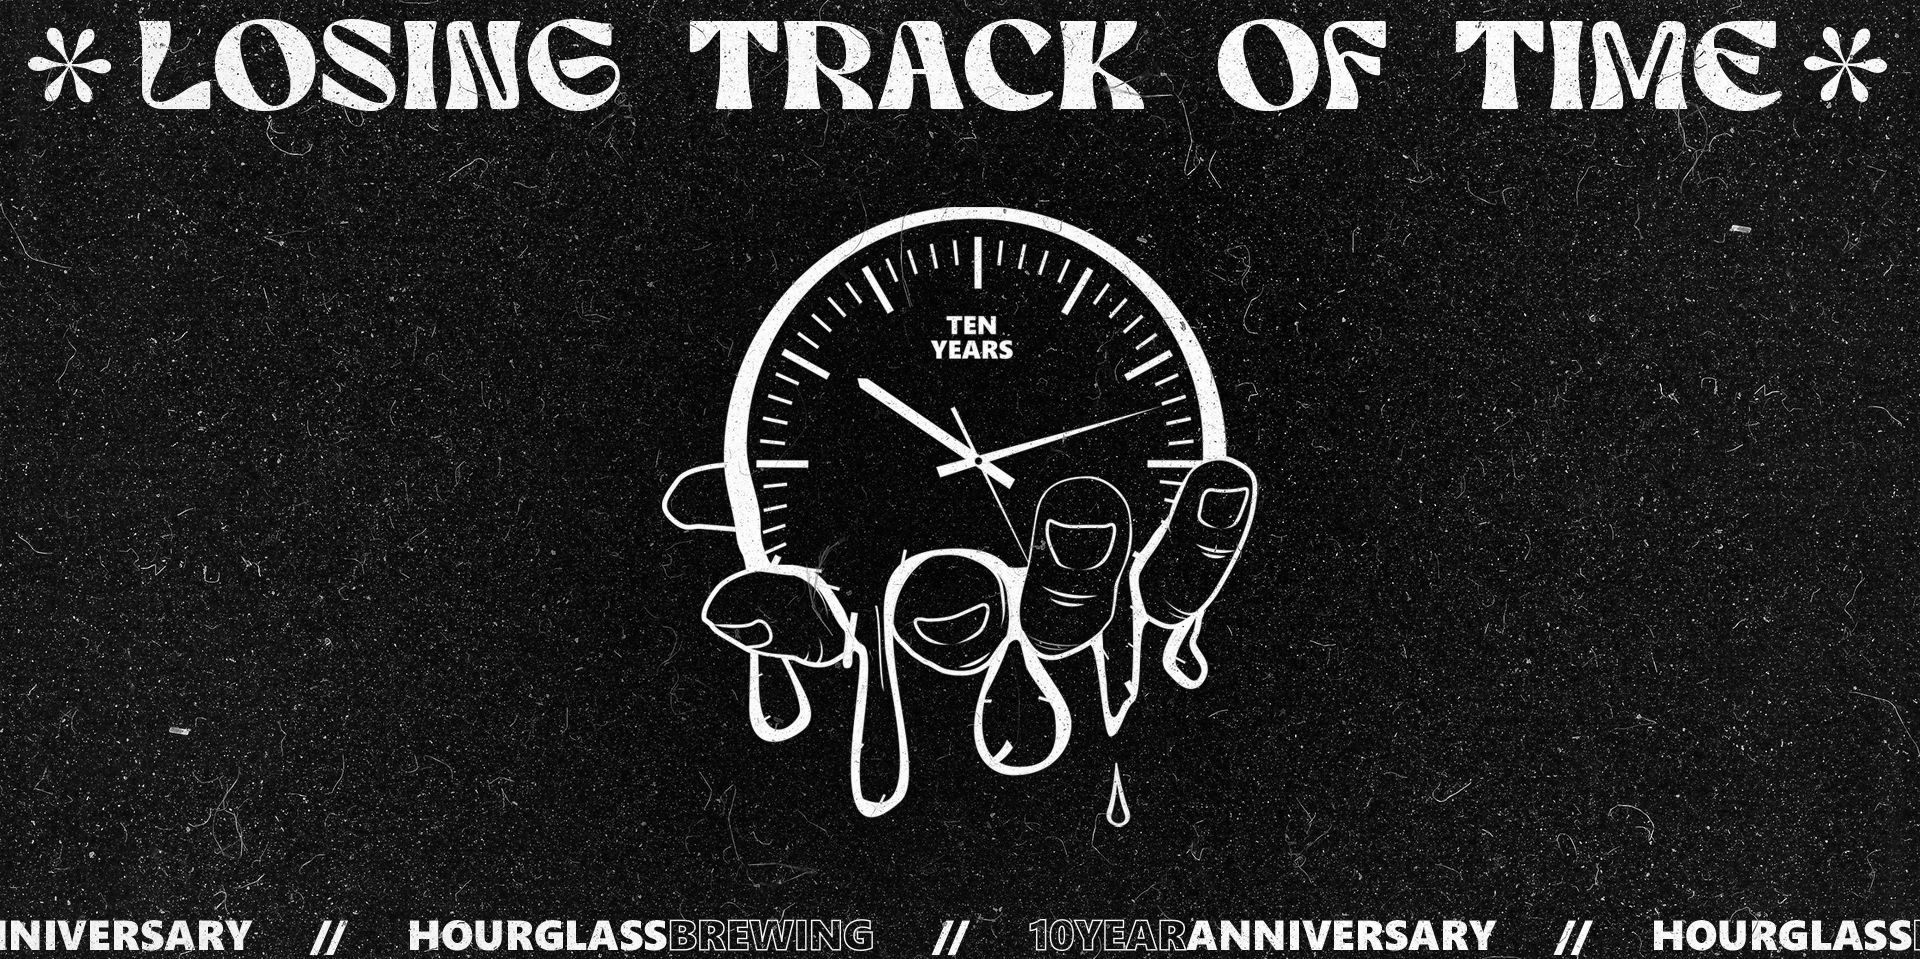 Hourglass Brewing Ten Year Anniversary promotional image